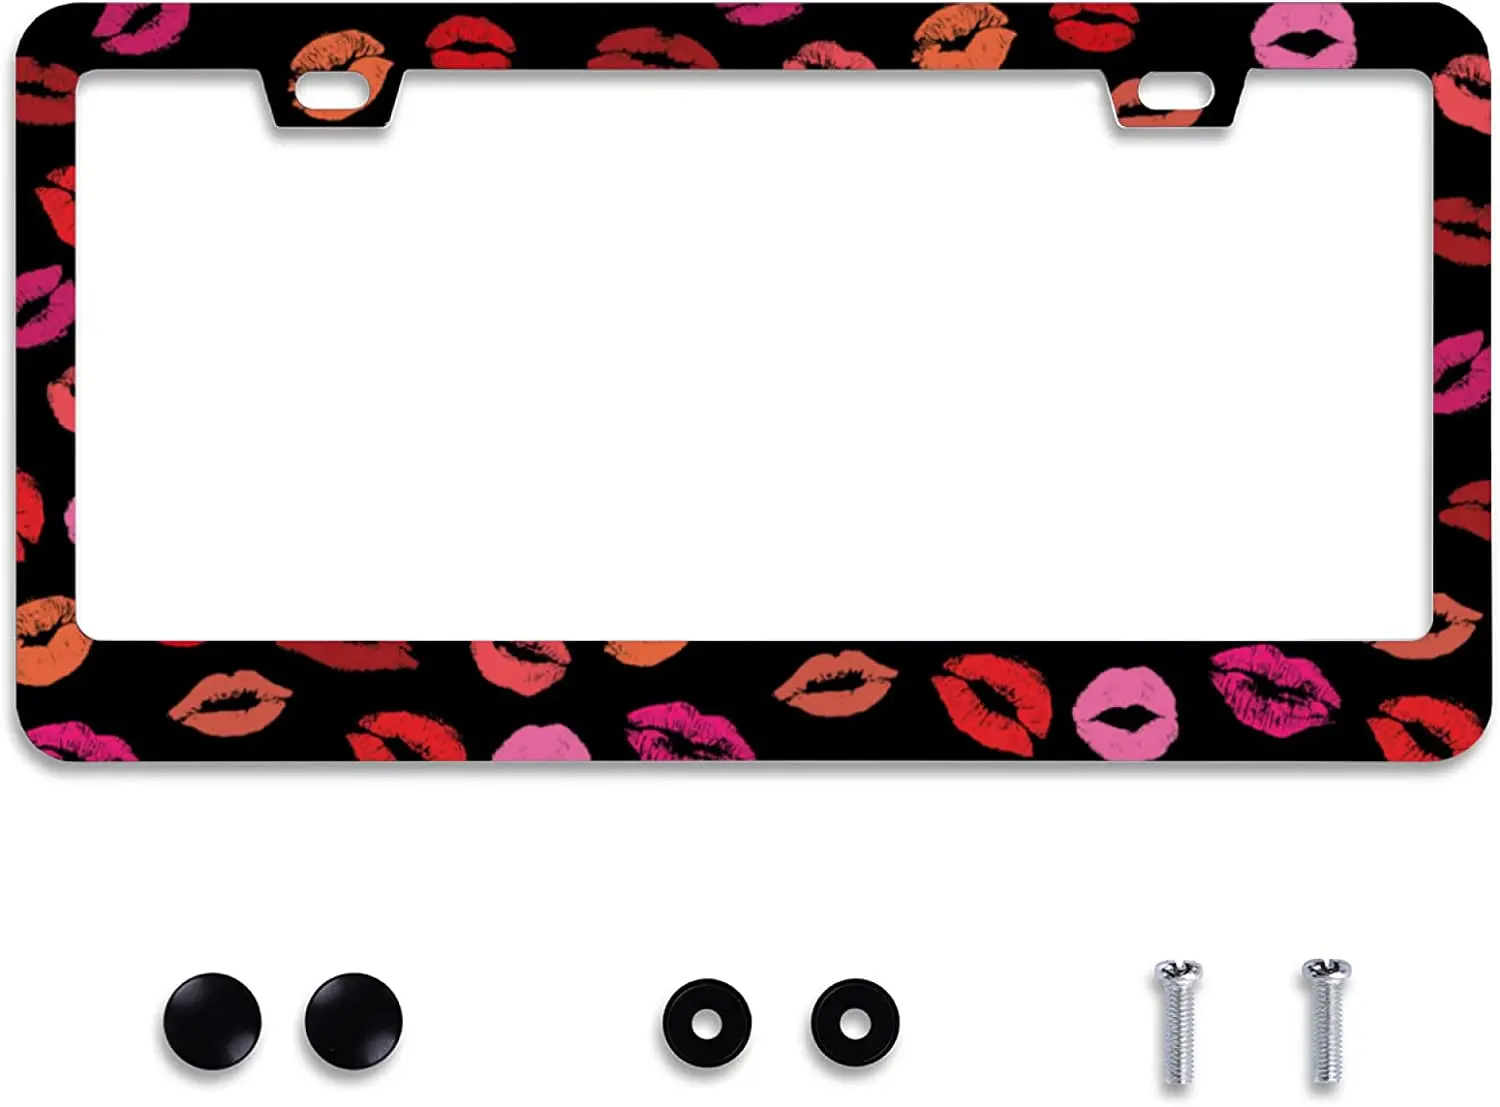 

Sexy Lips Red Pink Lip Kiss License Plate Frames Metal Car Universal Accessories Aluminum Cars Decor Fits Standard US Vehicles